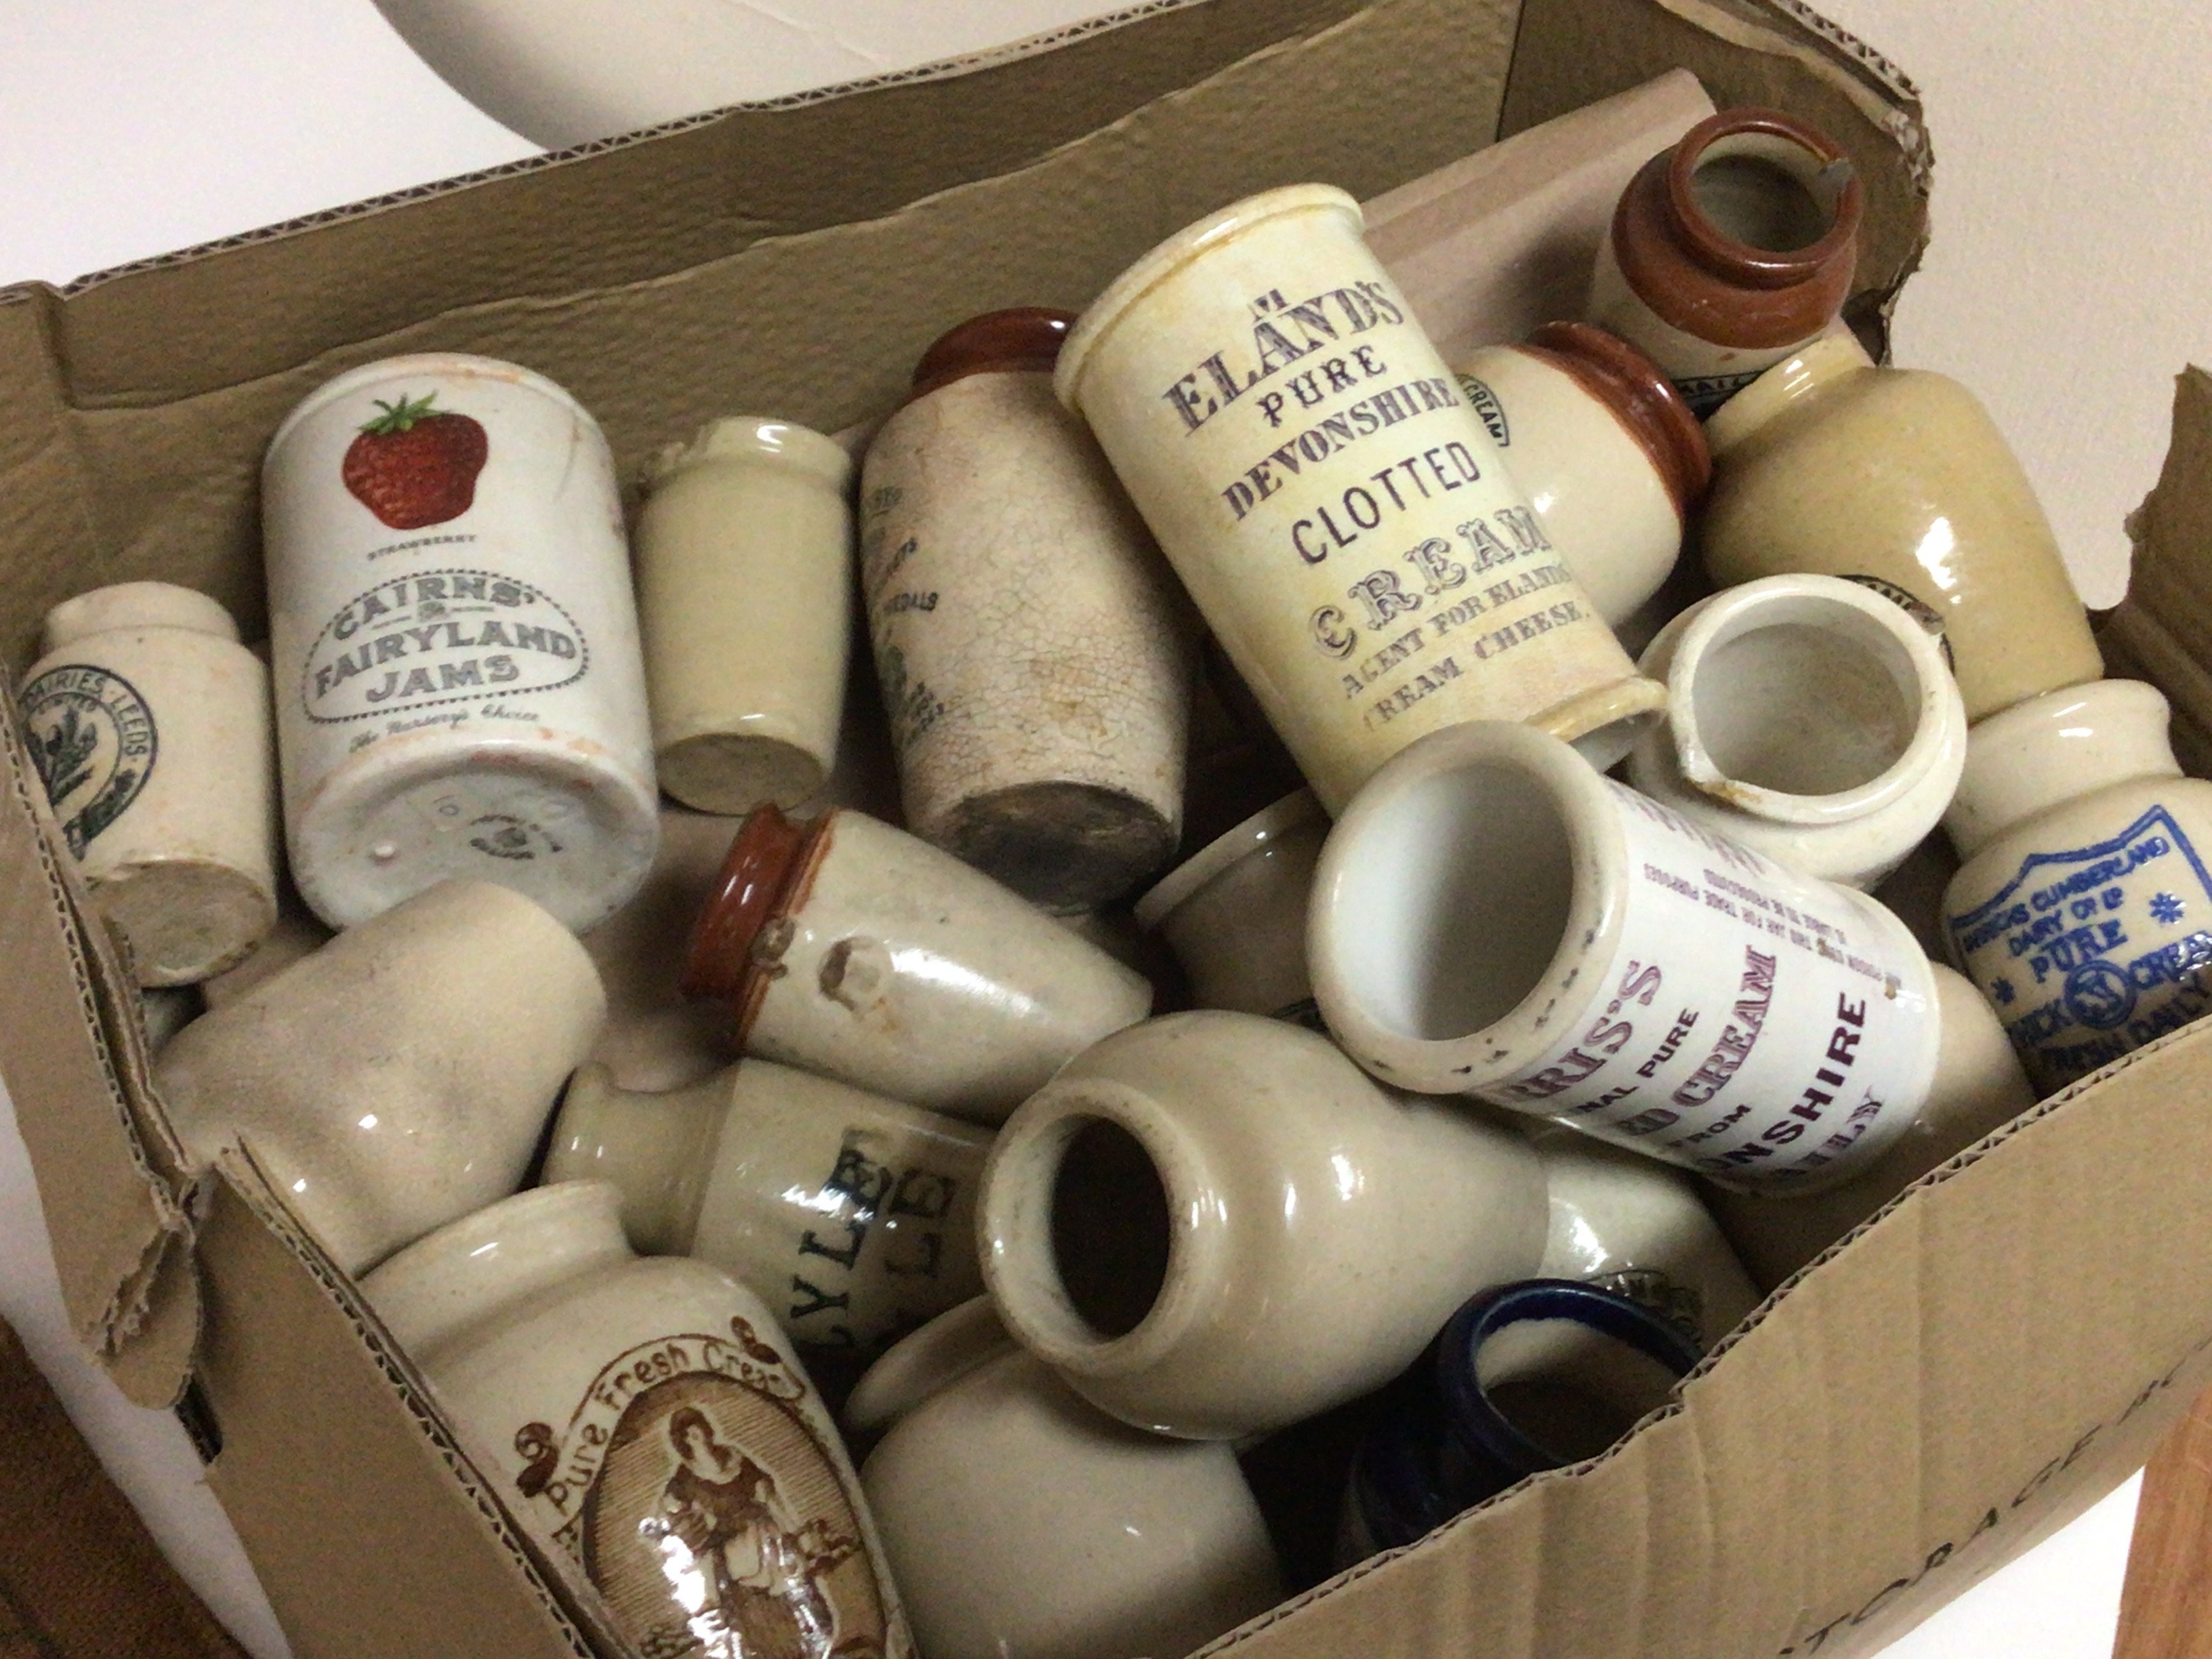 A good collection of Victorian and later stoneware